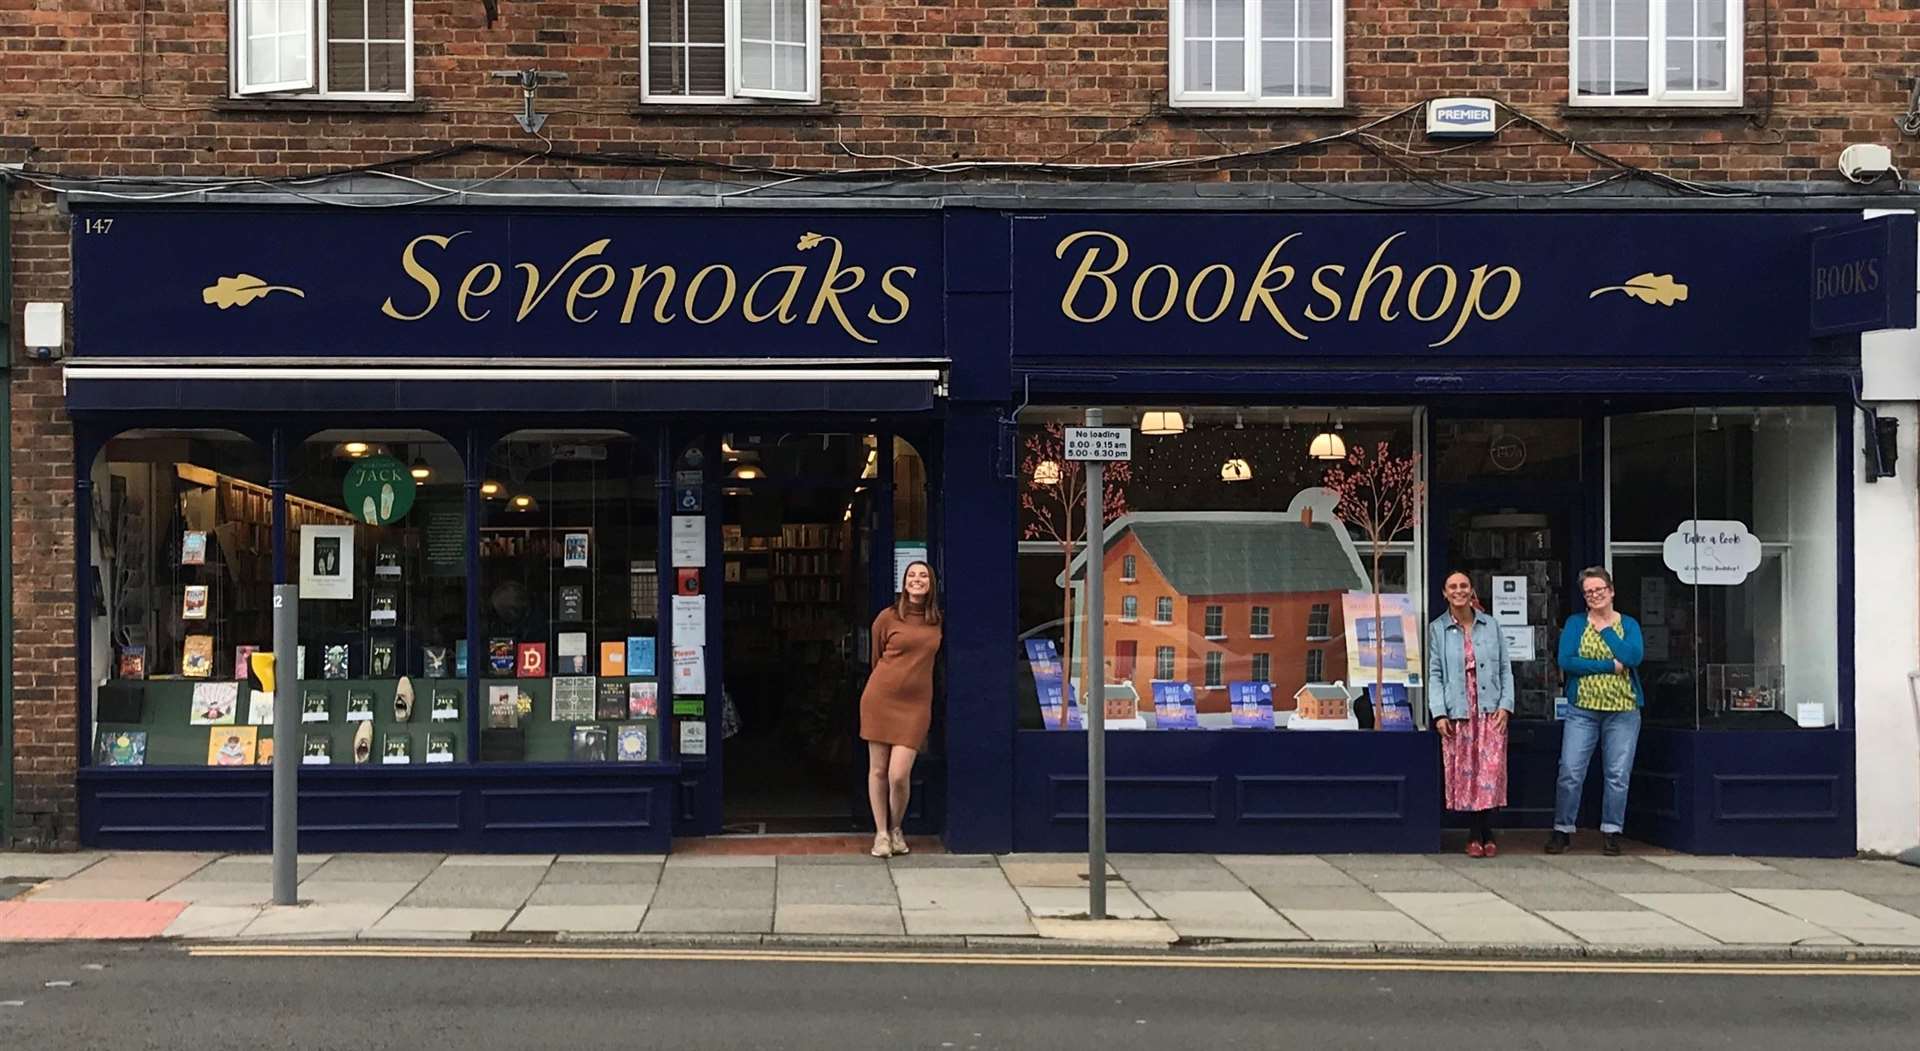 Sevenoaks Bookshop is the best independent book store in the UK